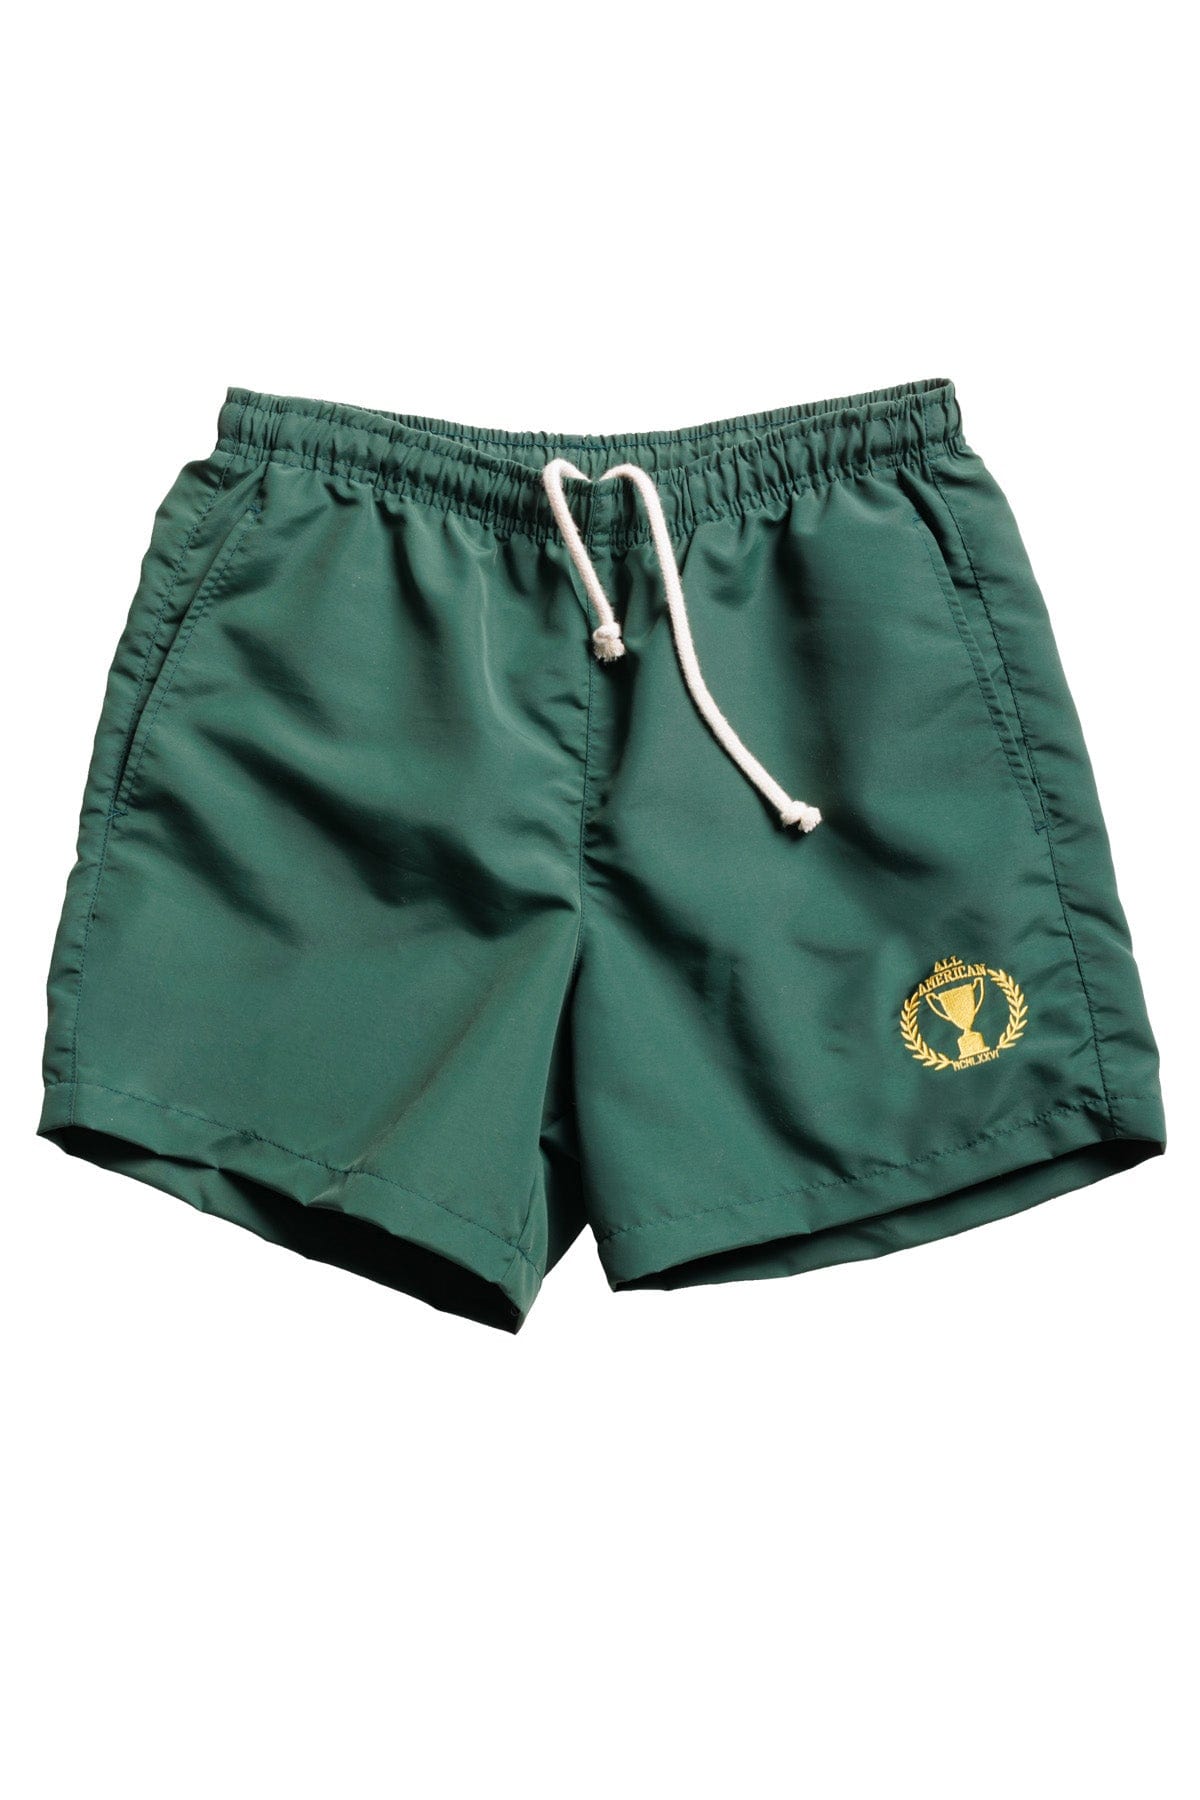 All American Supplex Shorts Forest / Small